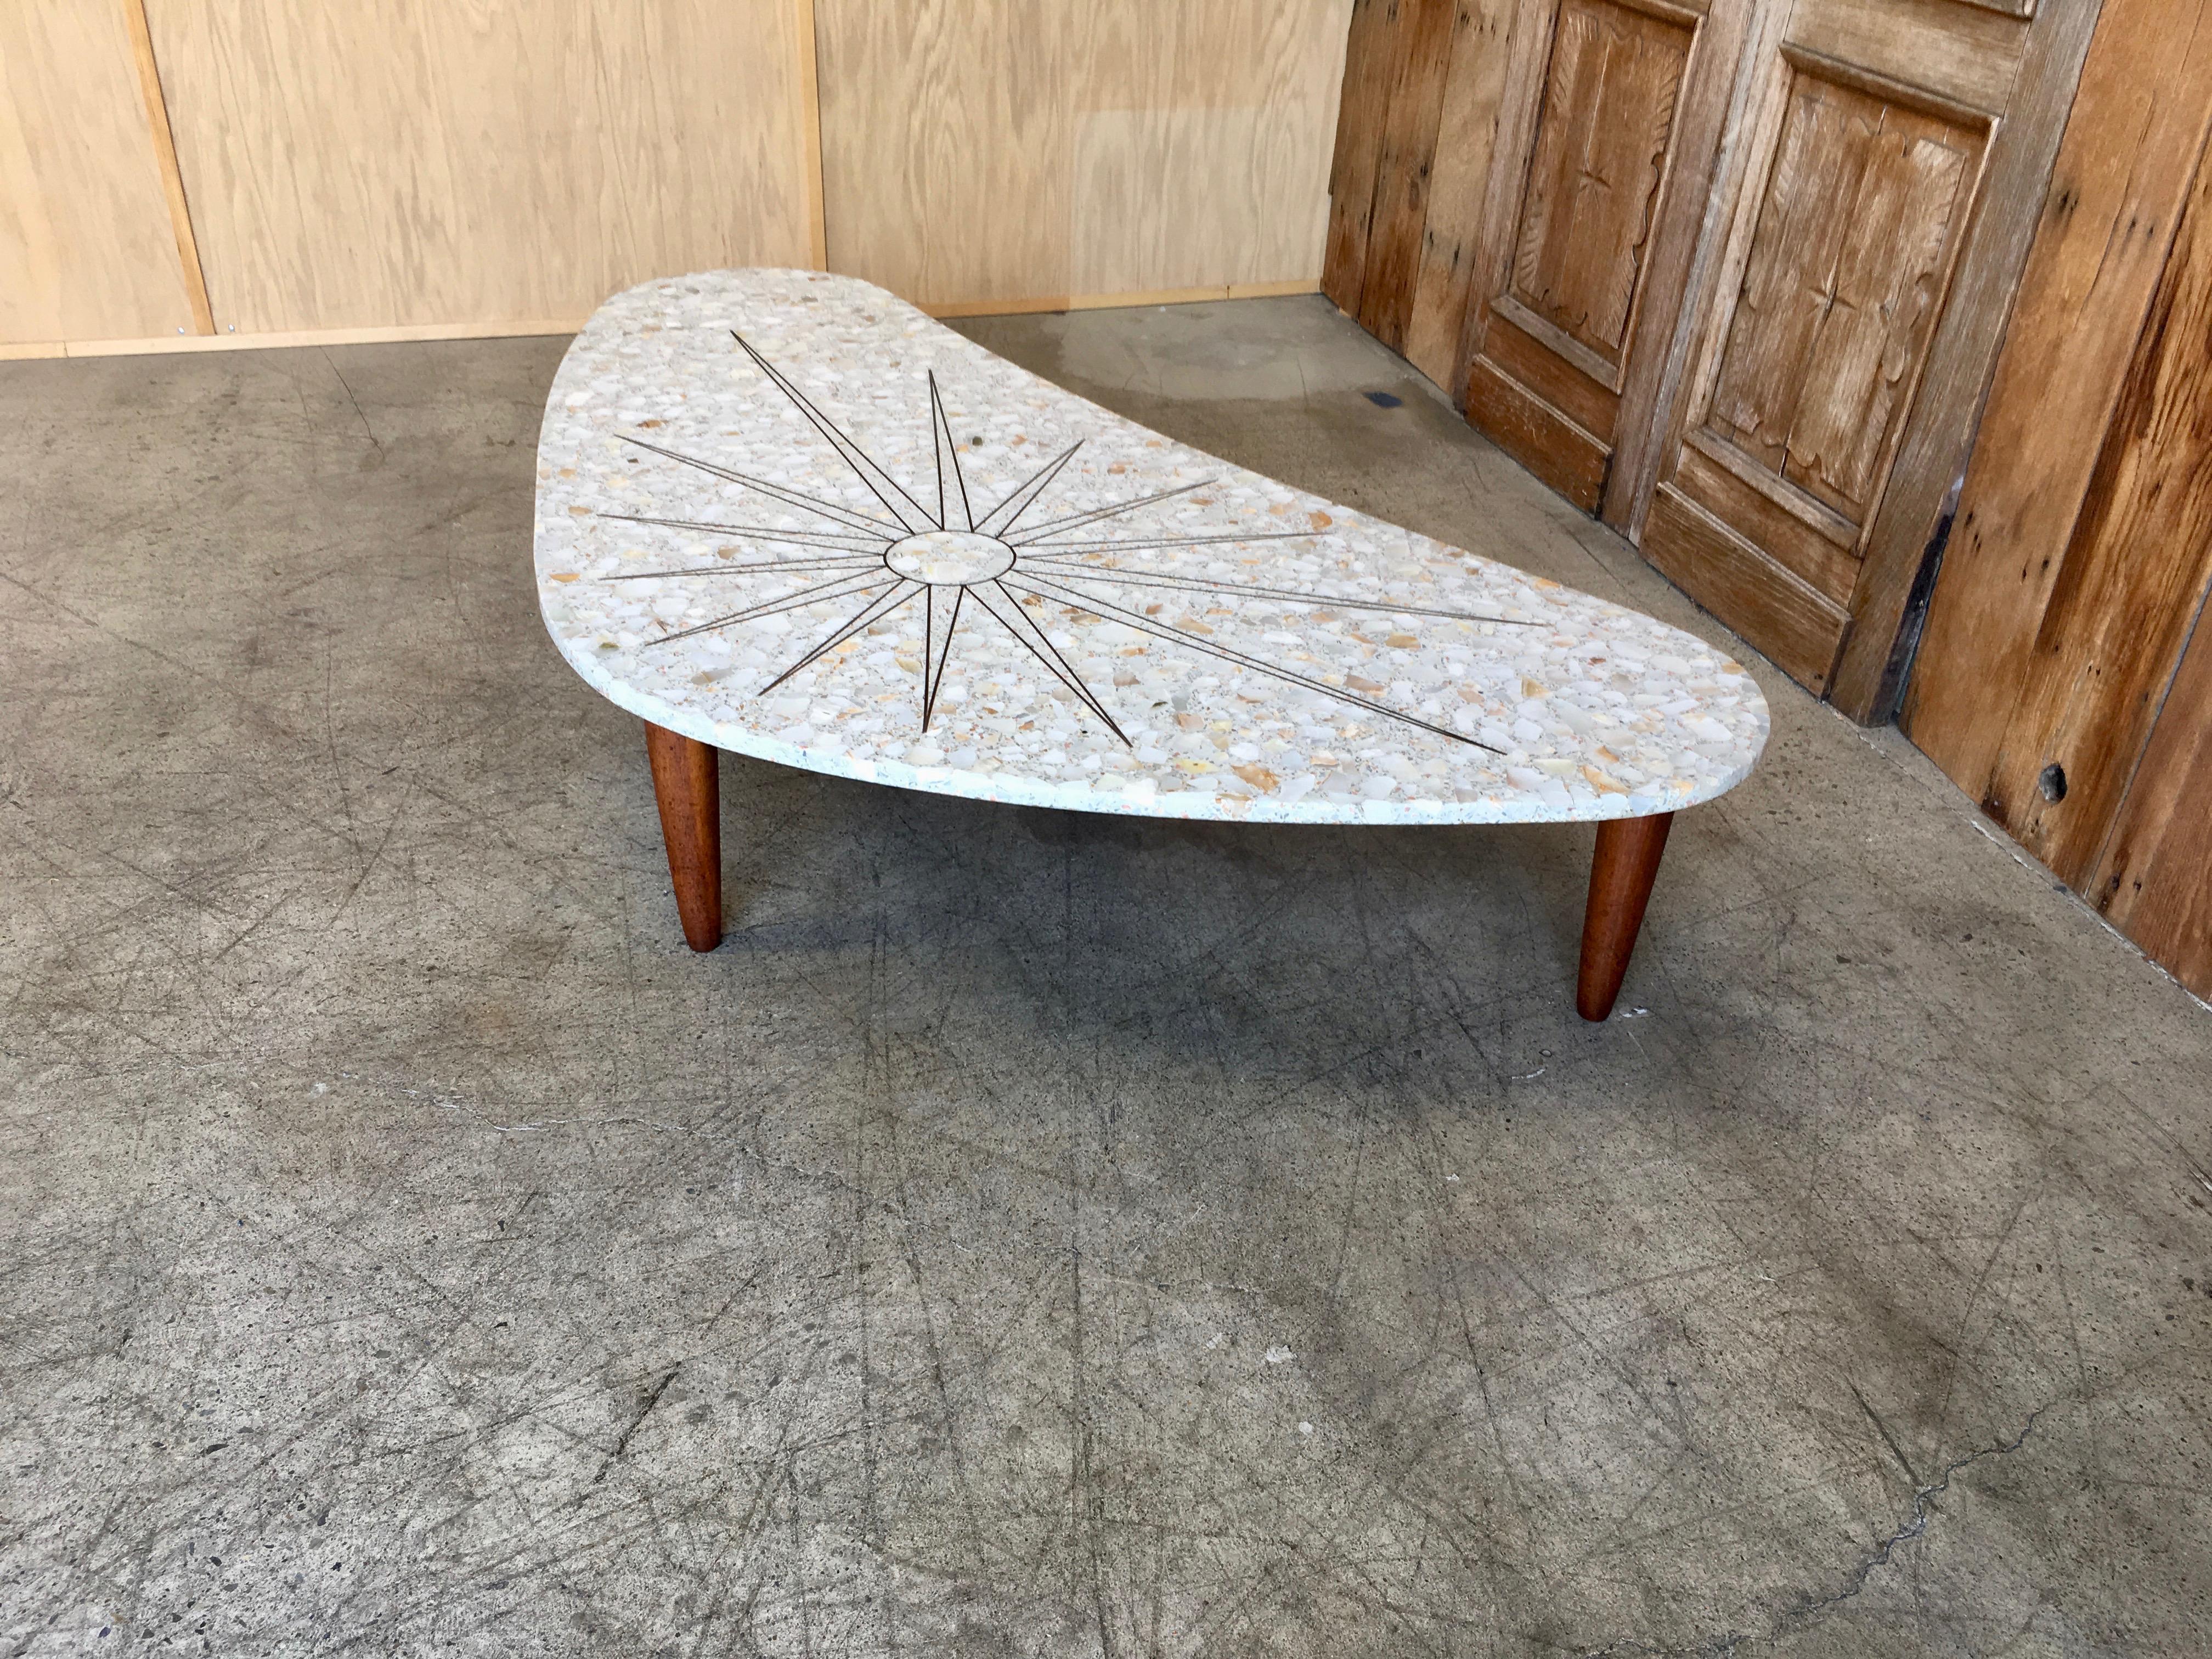 Massive coffee table with Italian walnut legs and a kidney shaped terrazzo top with brass inlaid sunburst.